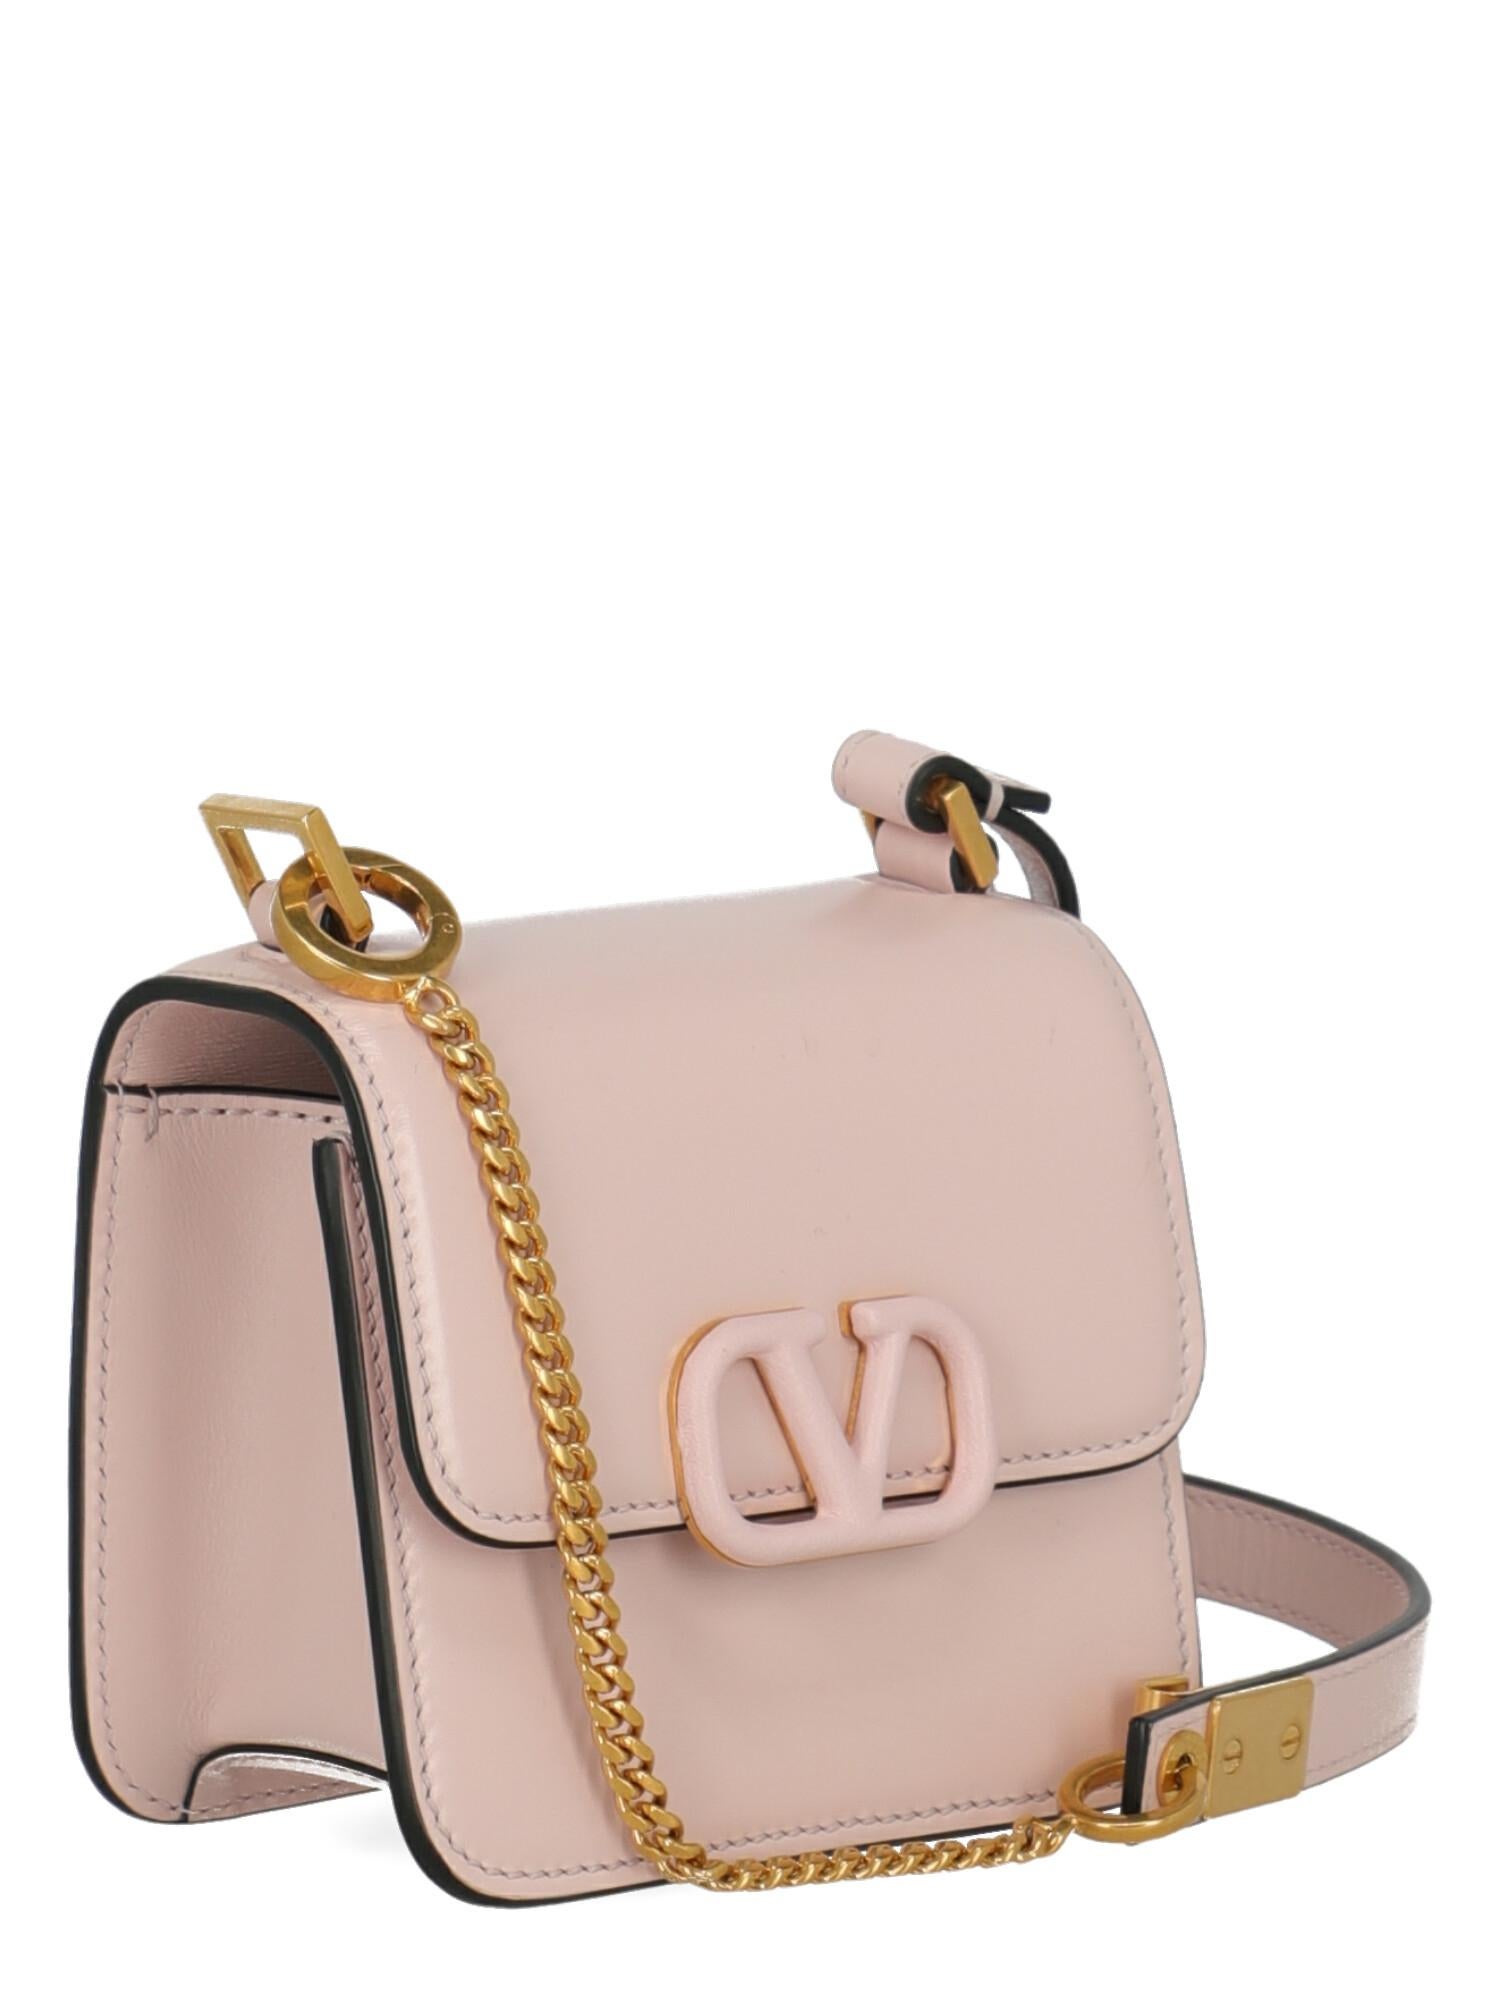 Valentino Woman Shoulder bag  Pink Leather In Excellent Condition For Sale In Milan, IT